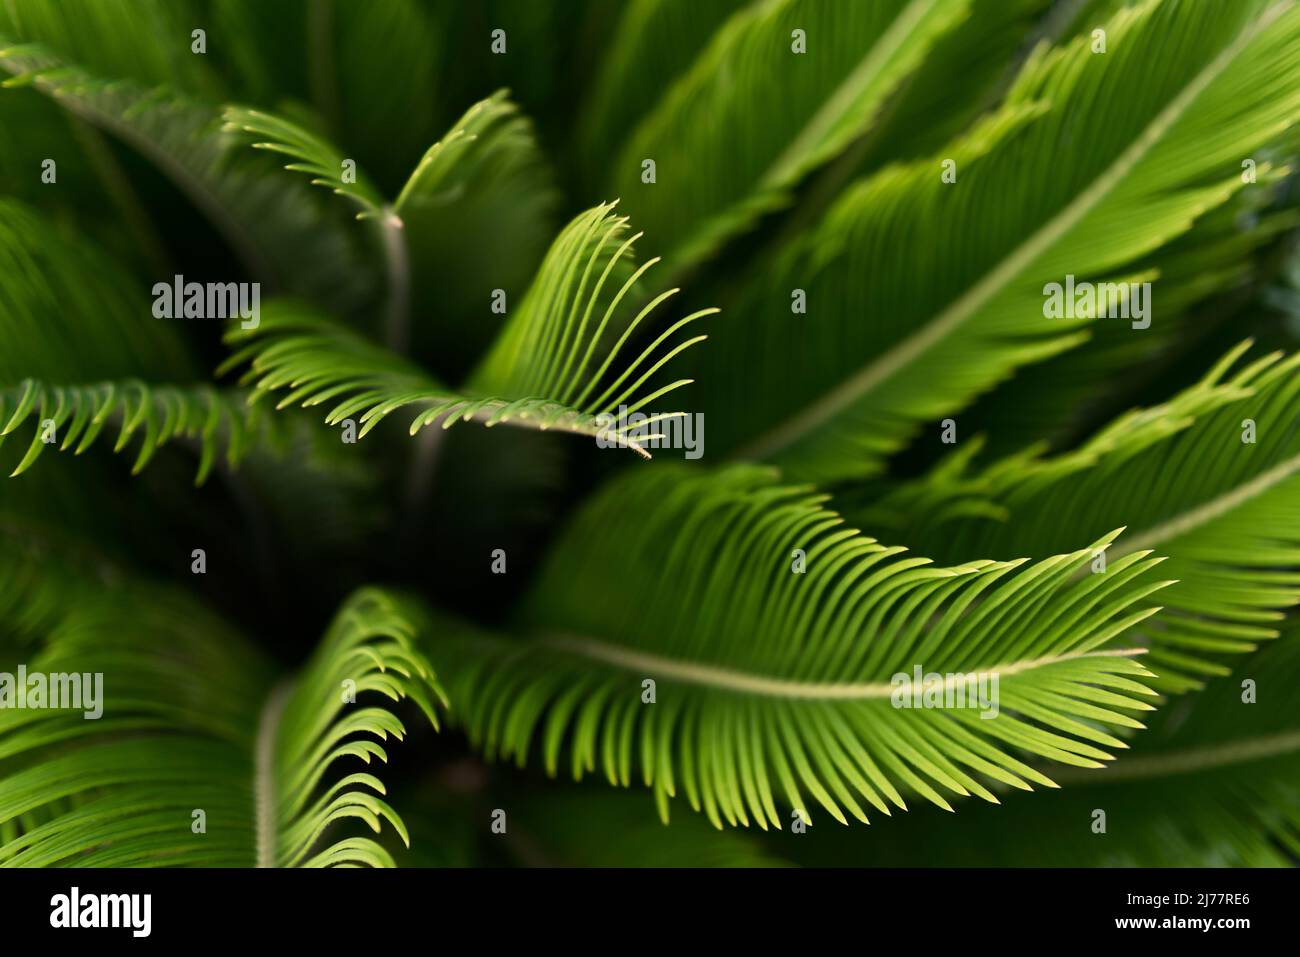 Leaves of sago palm or Cycas revoluta Stock Photo